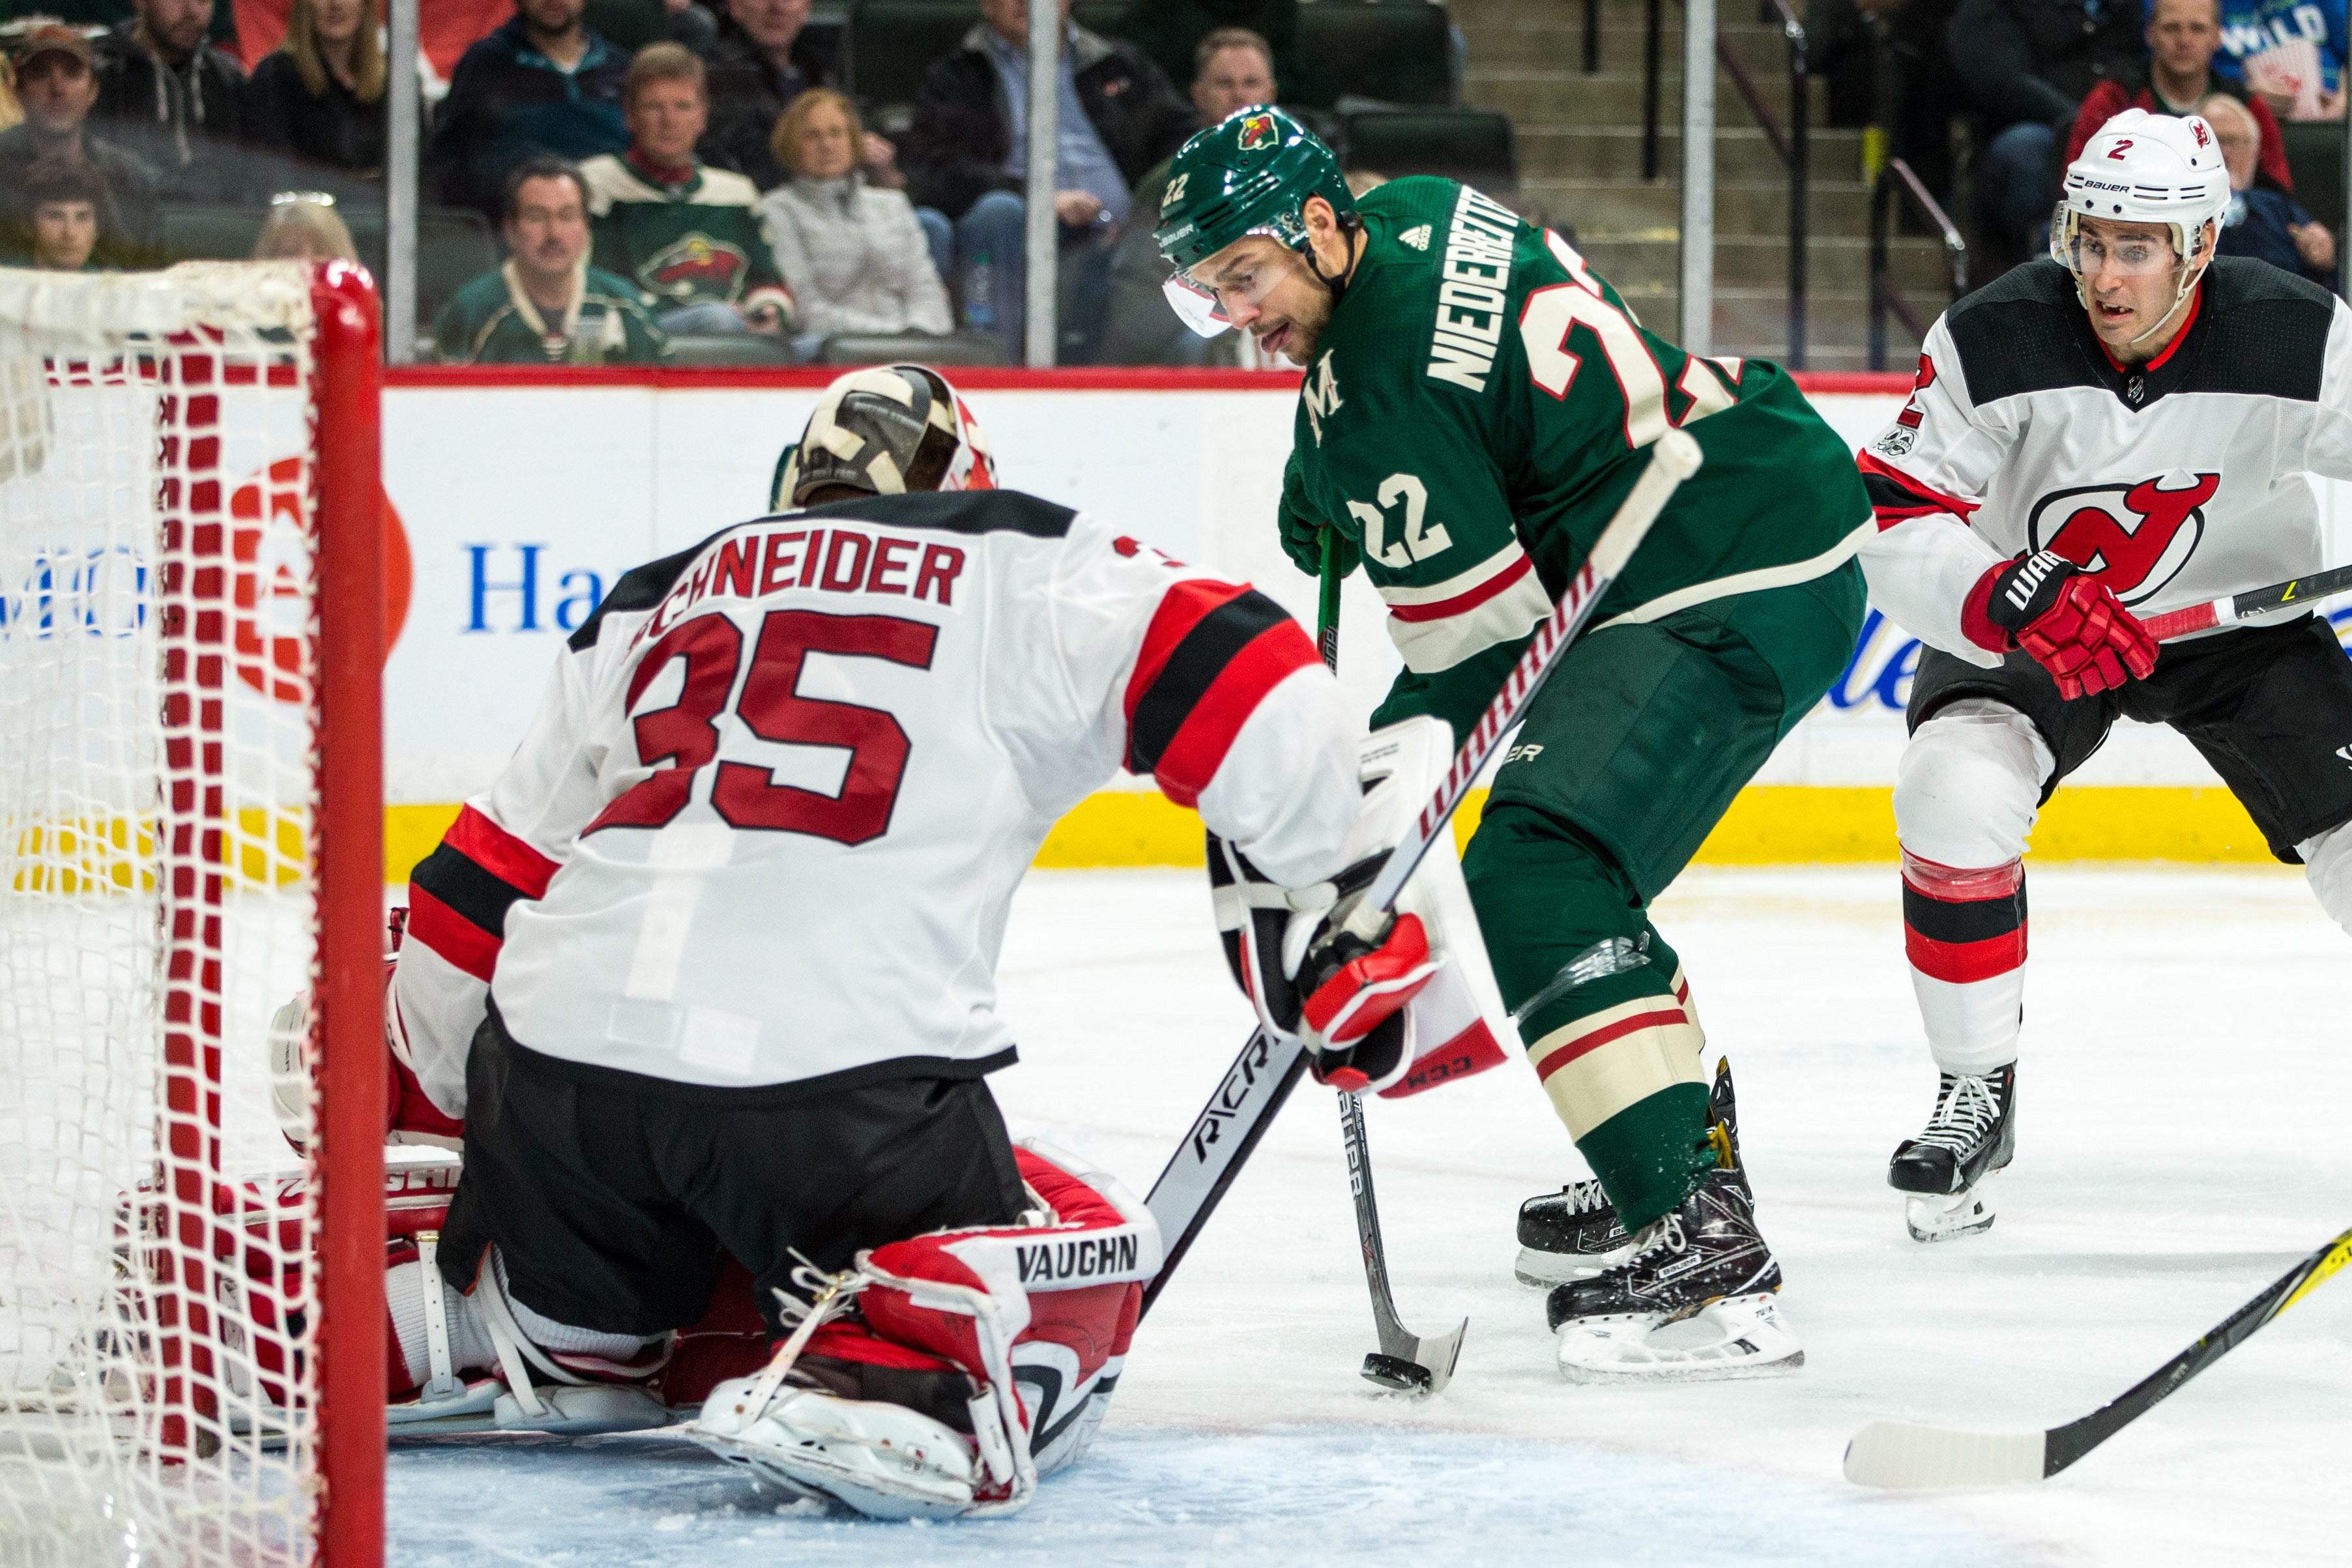 Devils end road trip with 4-3 overtime win over Wild